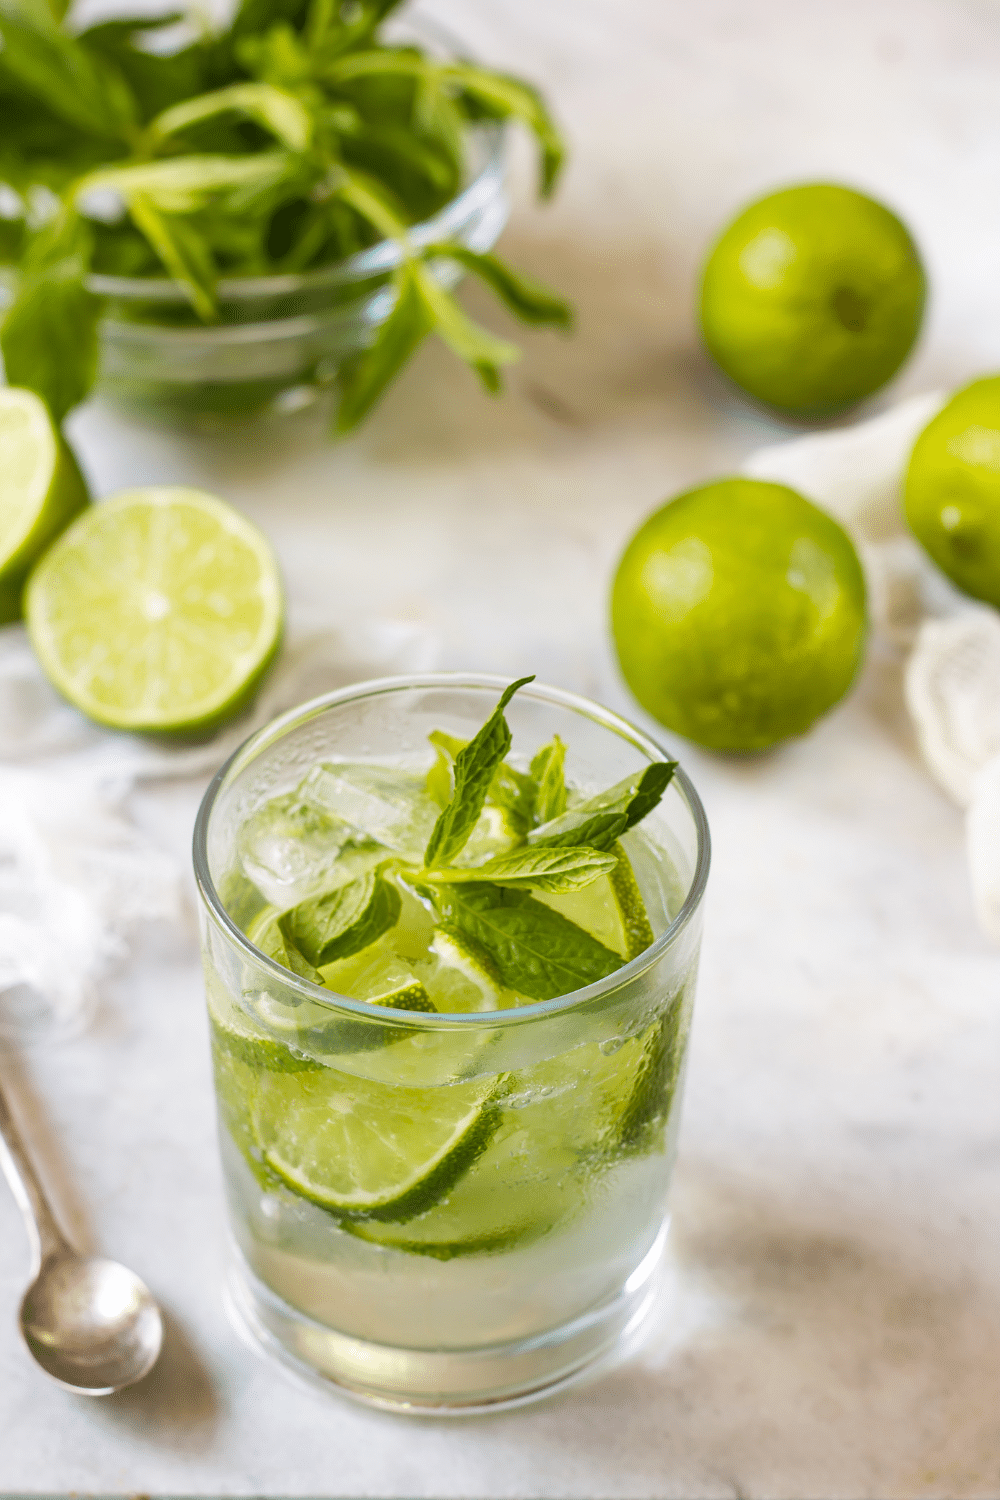 Exquisite mojito cocktail served in a frosty glass, garnished with fresh lime slices, sprigs of aromatic mint, and a dash of monk fruit sweetener.